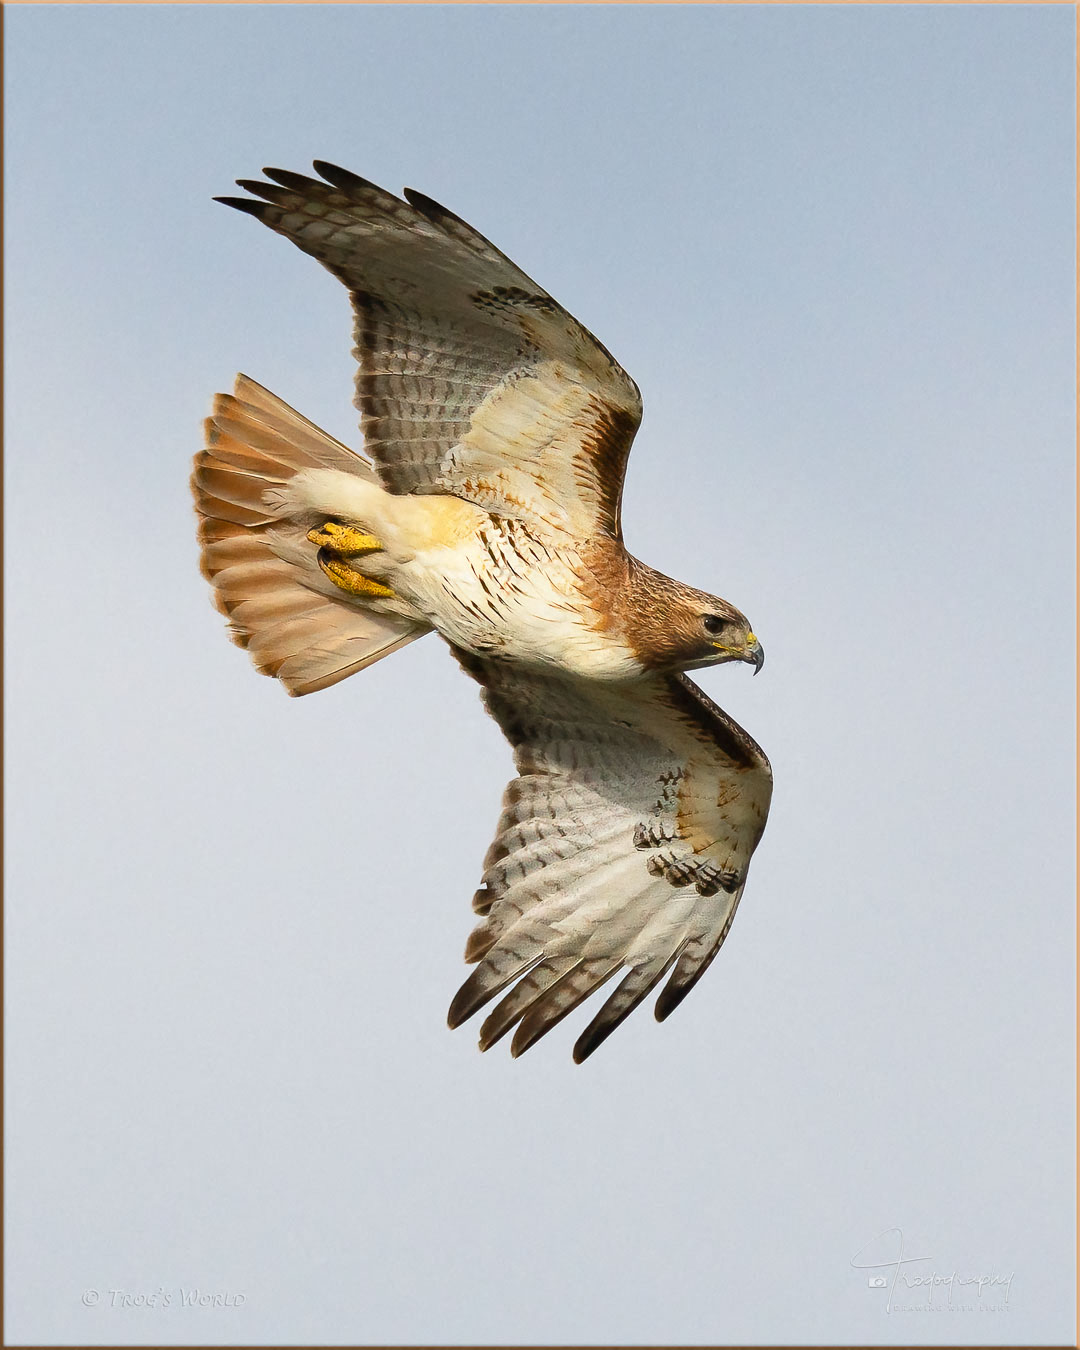 Red-tailed Hawk in flight over Illinois prairie